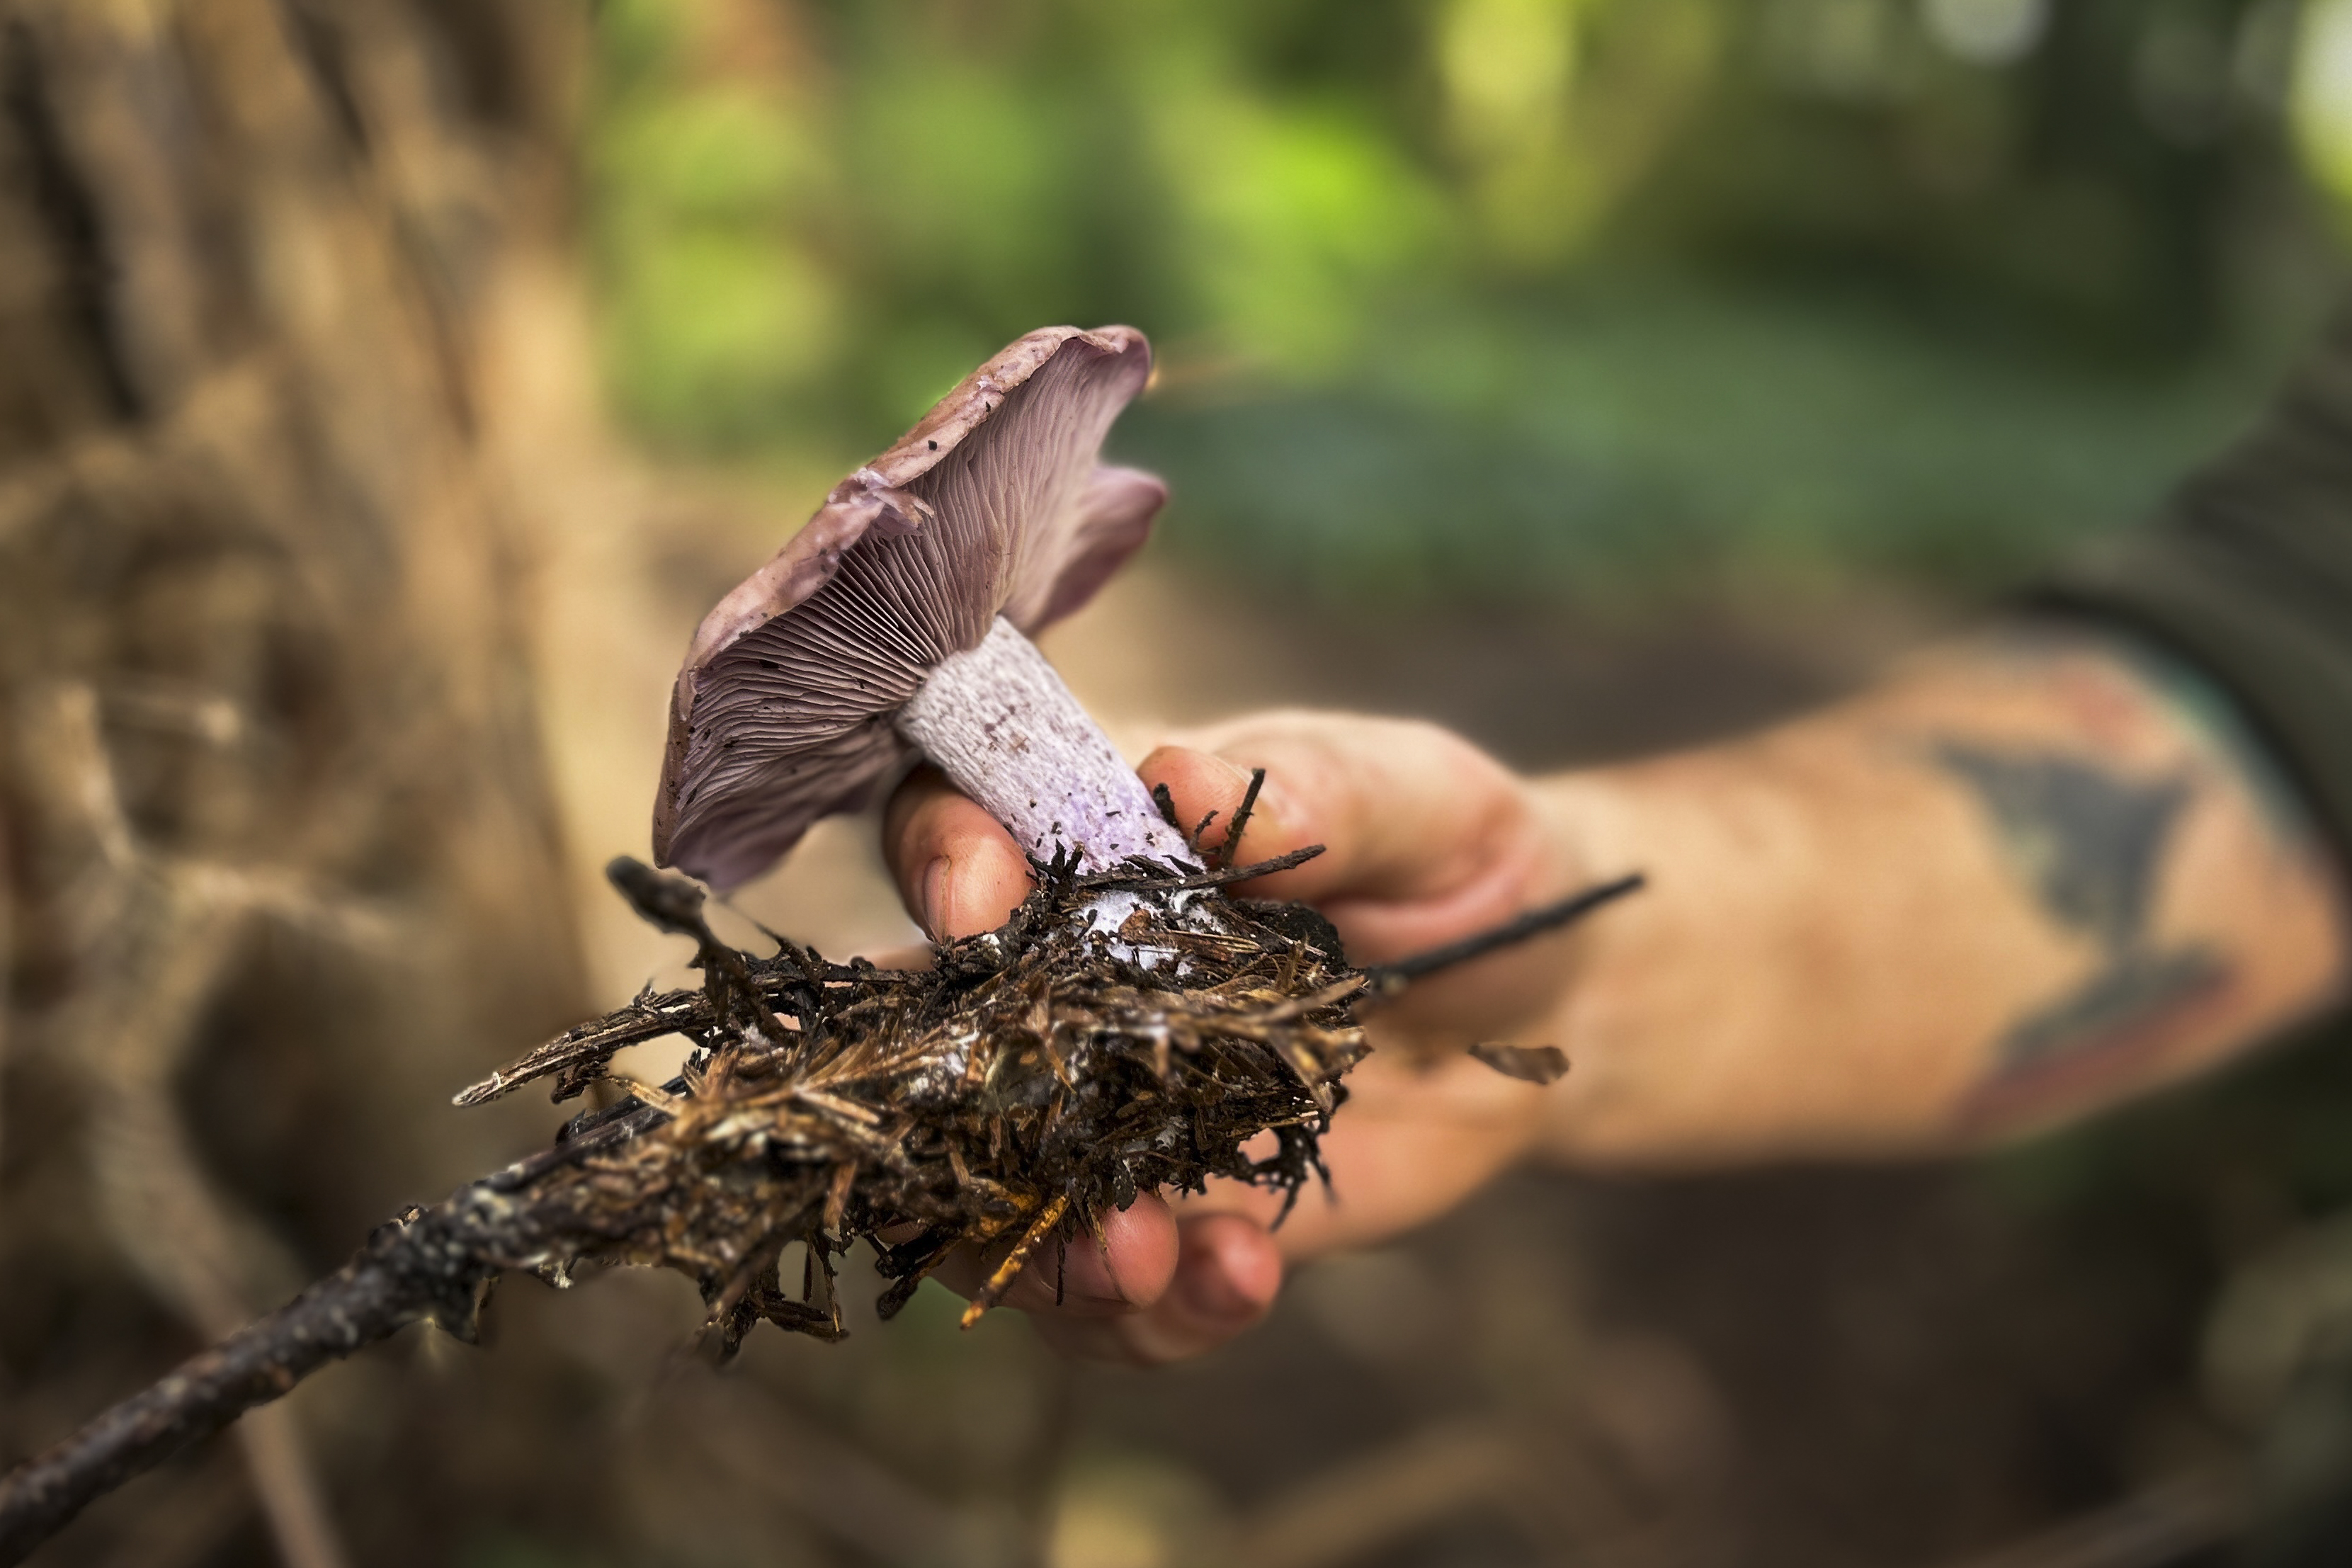 a white man's tattooed forearm is seeing holding a large, dirt-encrusted purple mushroom in a forest